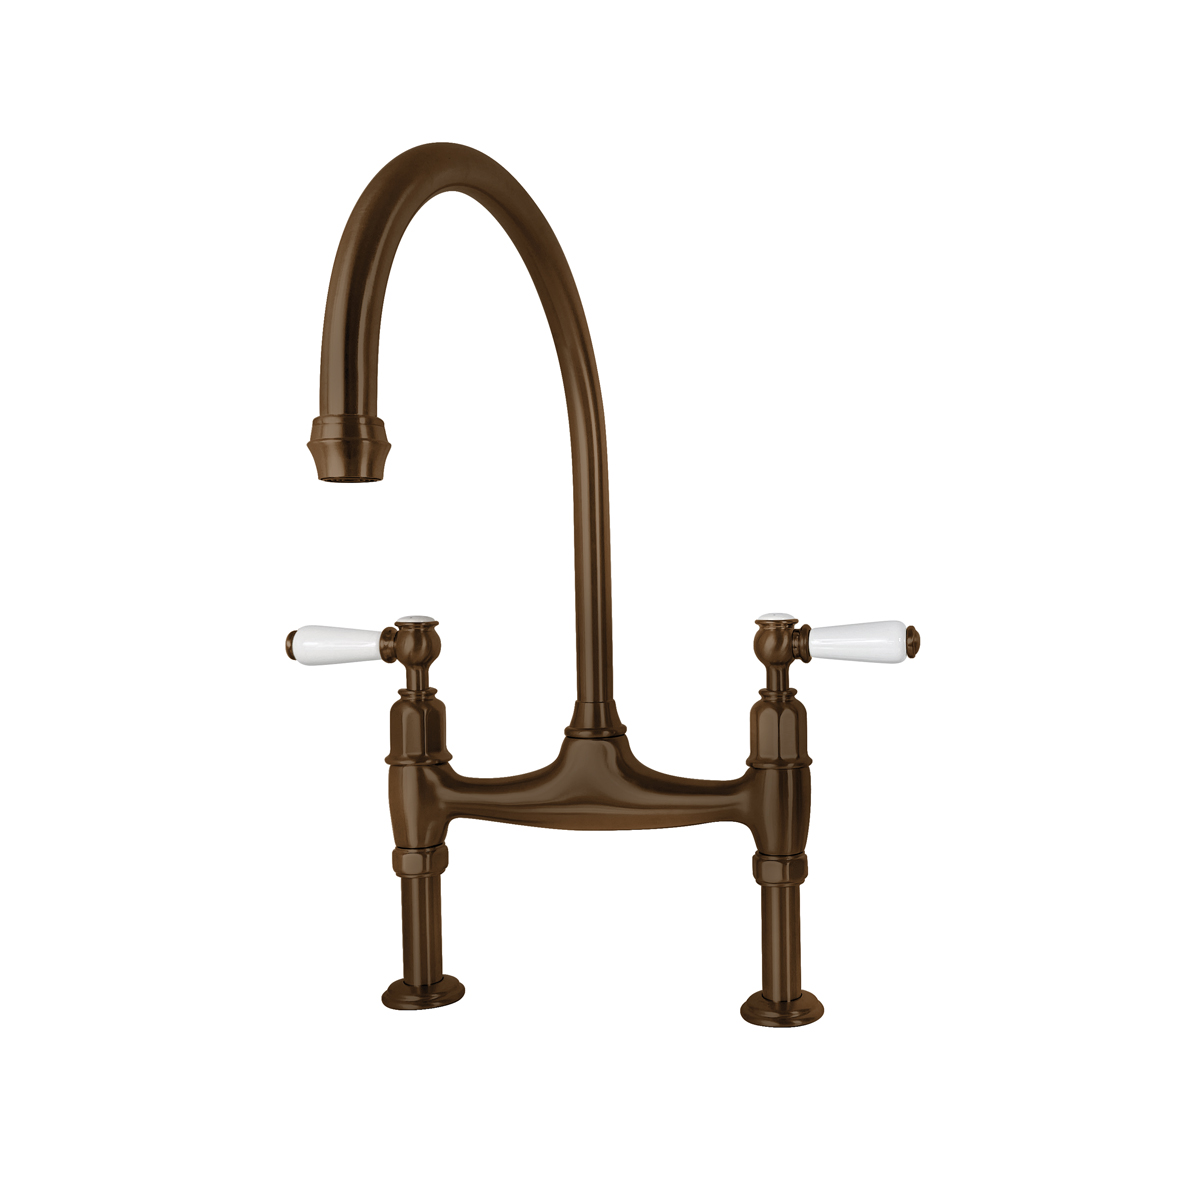 Shaws by Perrin & Rowe Pendleton bridge mixer in english bronze. Ionian style kitchen tap with straight unions AUSH.4193. Distributed in Australia by Luxe by Design, Brisbane.